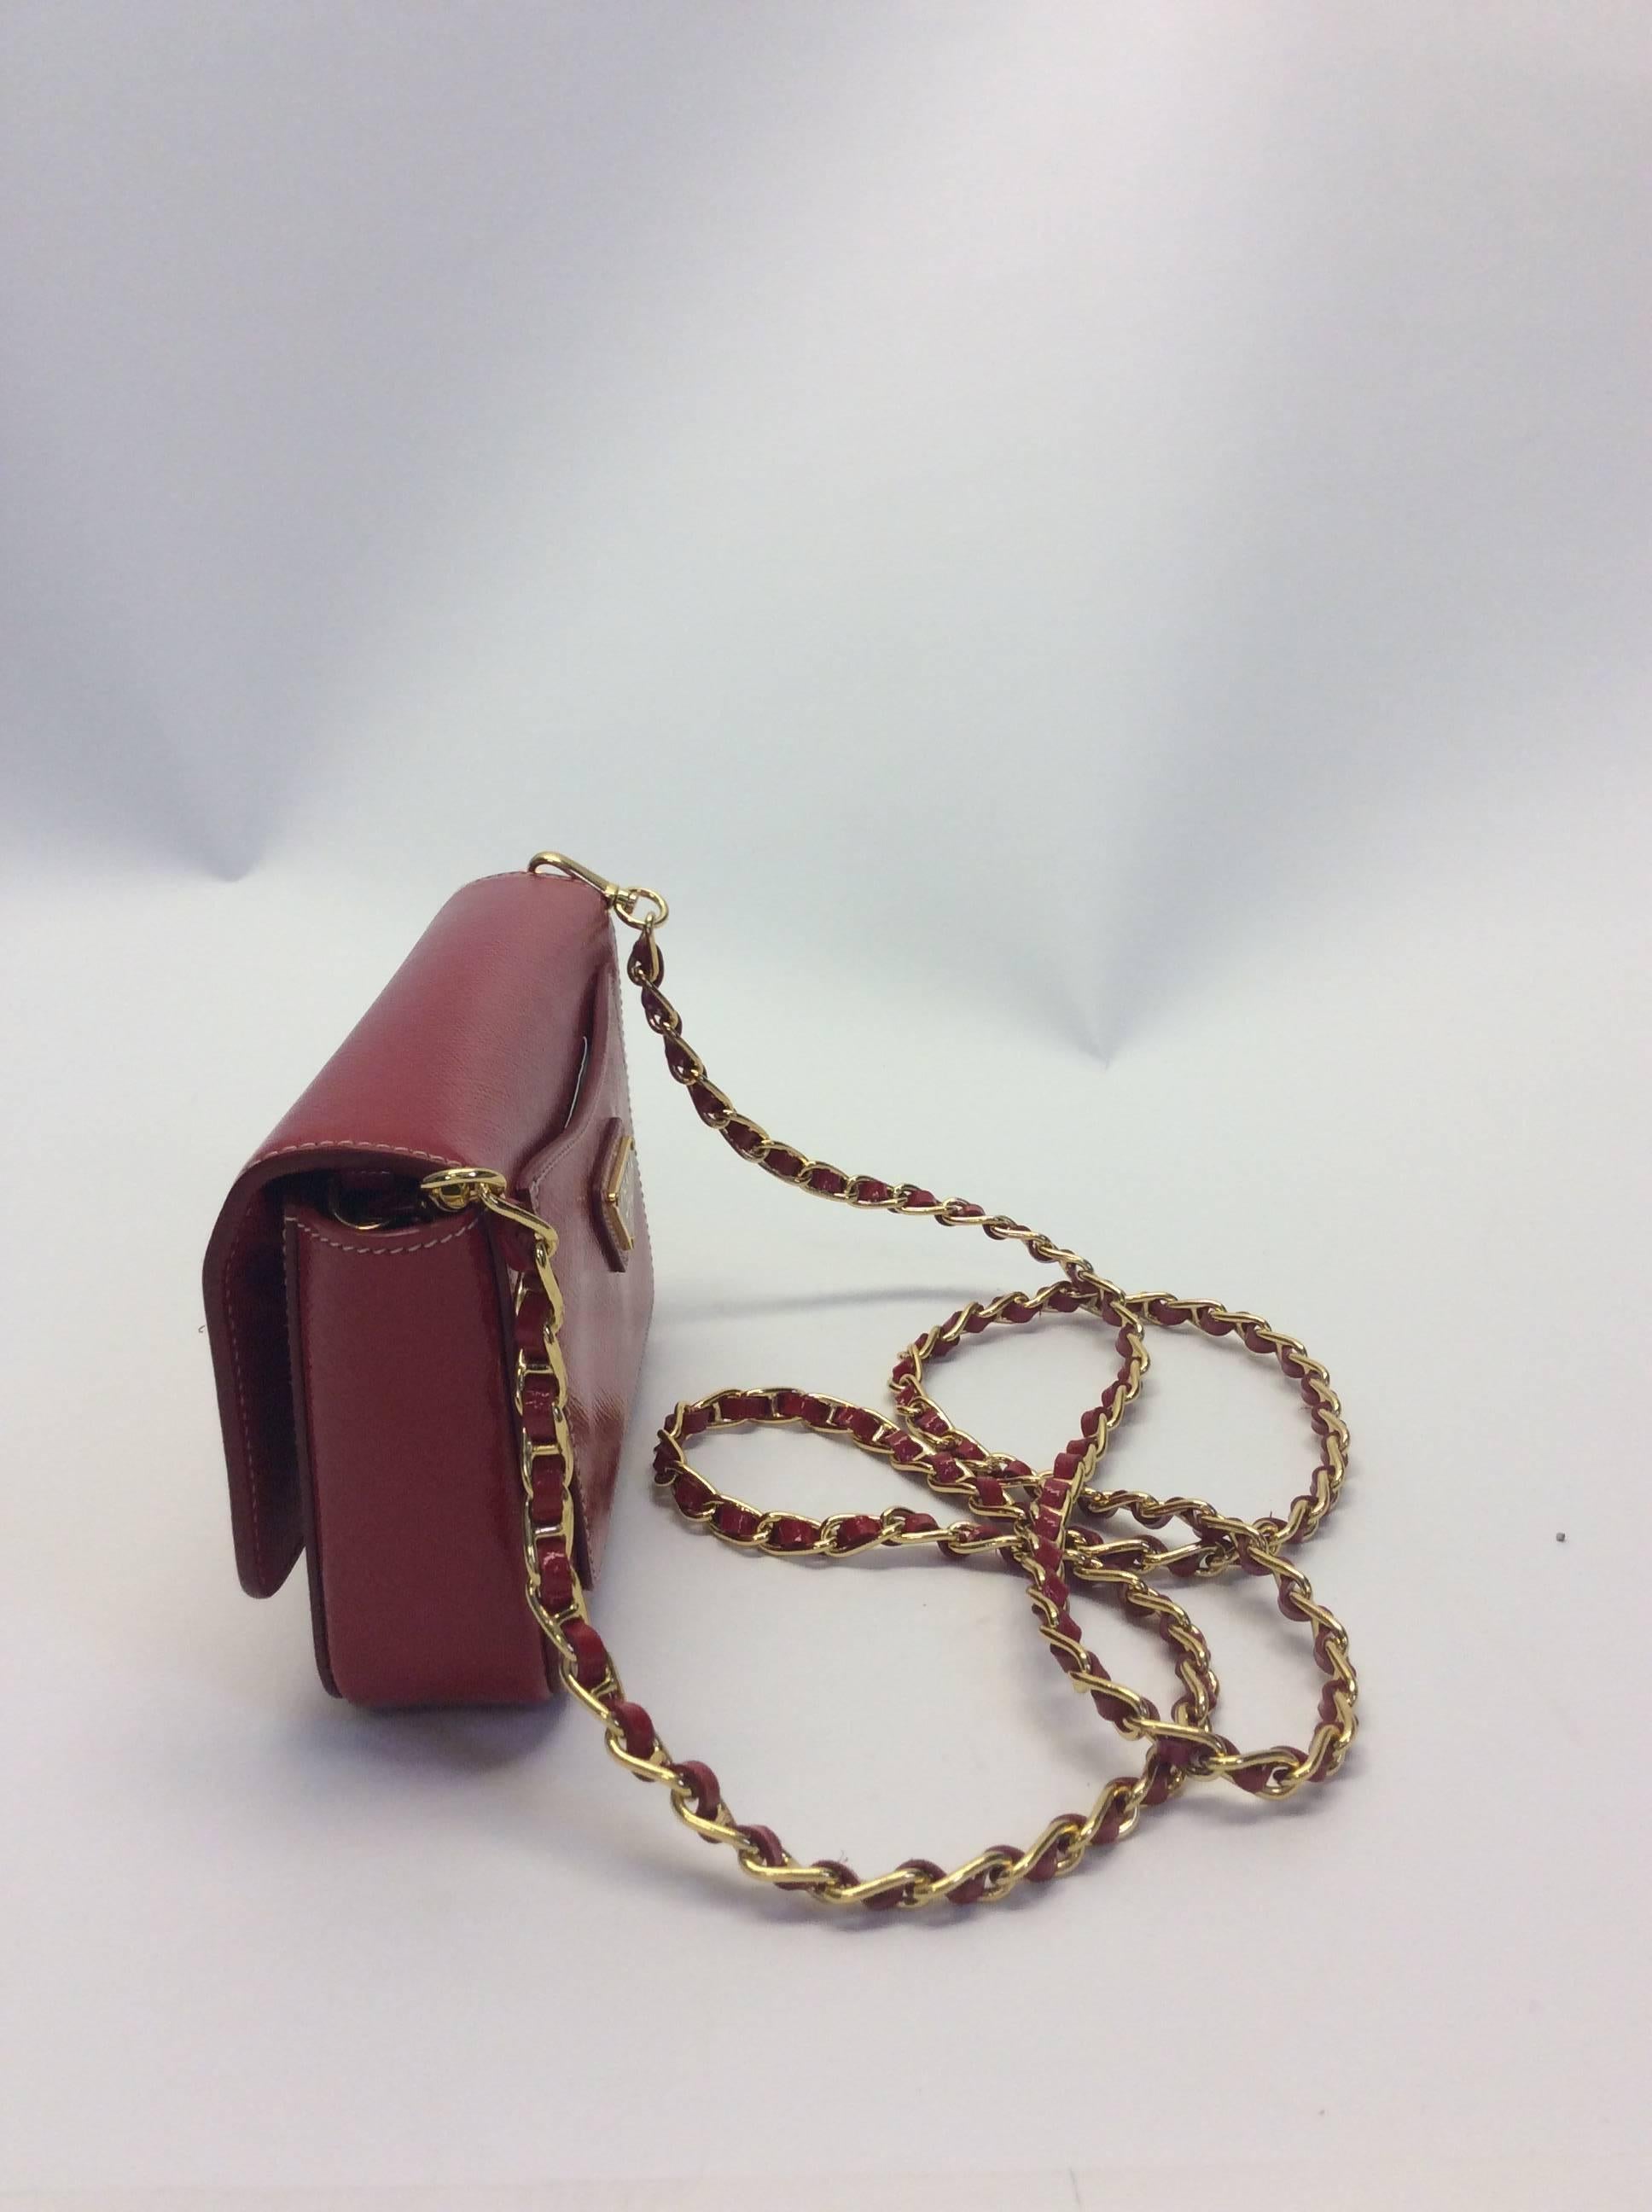 Prada Petite Red Patent Leather Crossbody
Features a gold chain with a 23 inch strap drop
$399
Made in italy
7 inches Length, 4 inches Height,  2 inches Diameter
Authentiicty card included